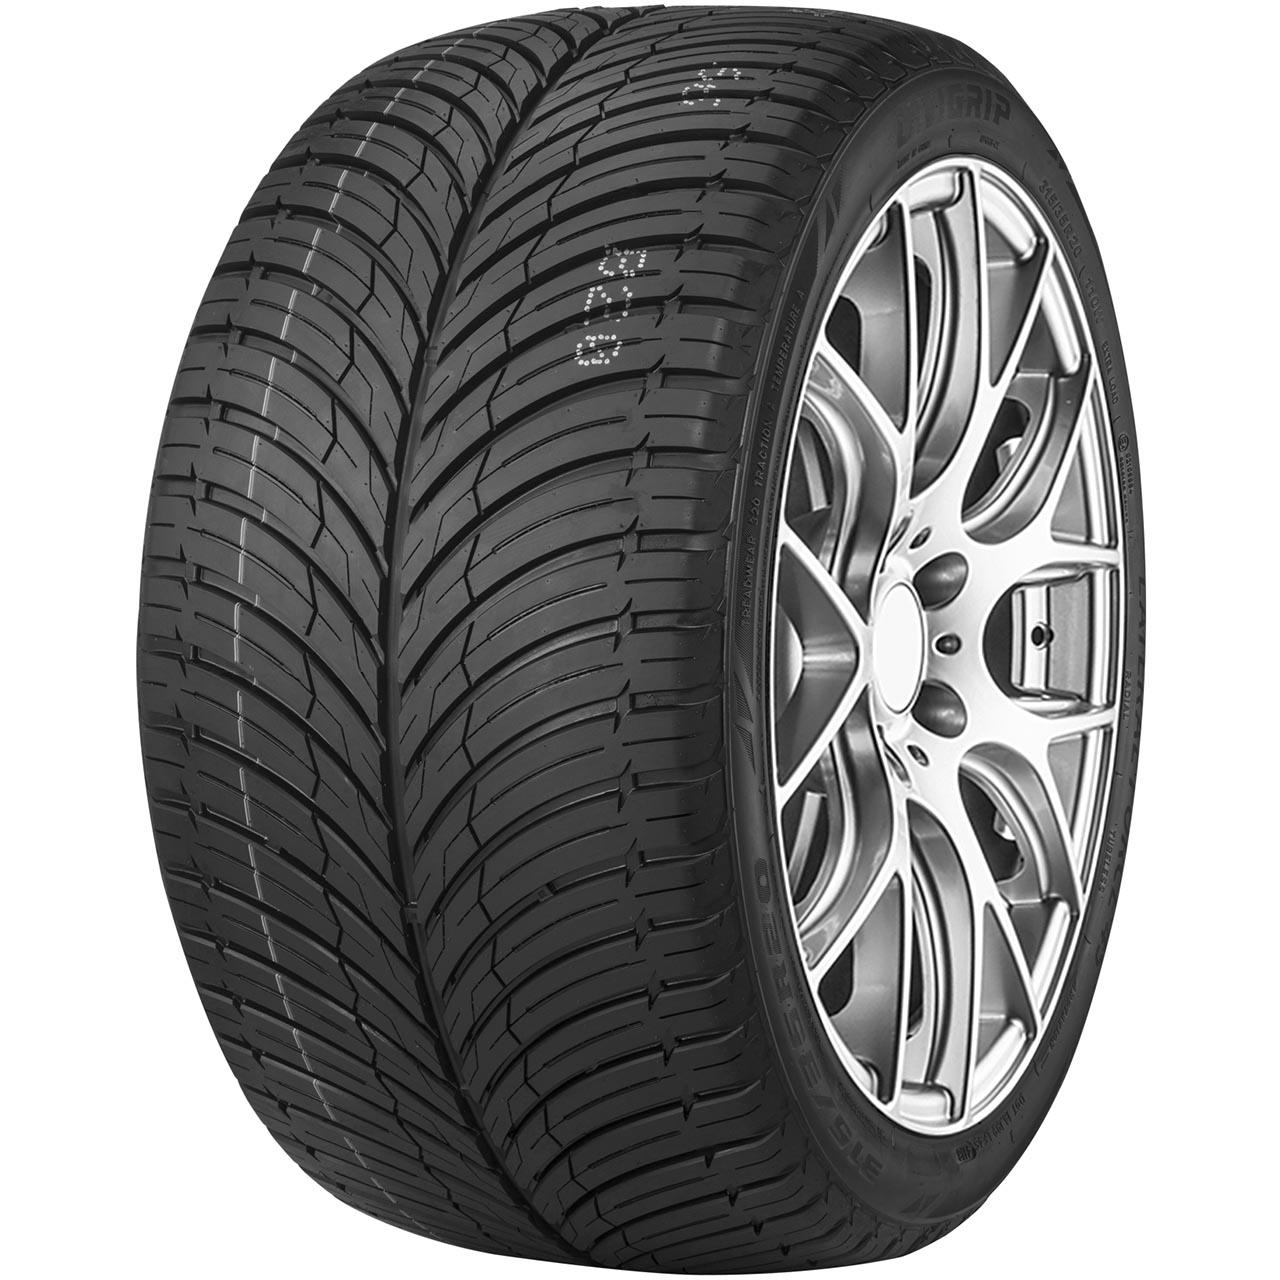 Unigrip Lateral Force 4S 275/40R20 106W XL